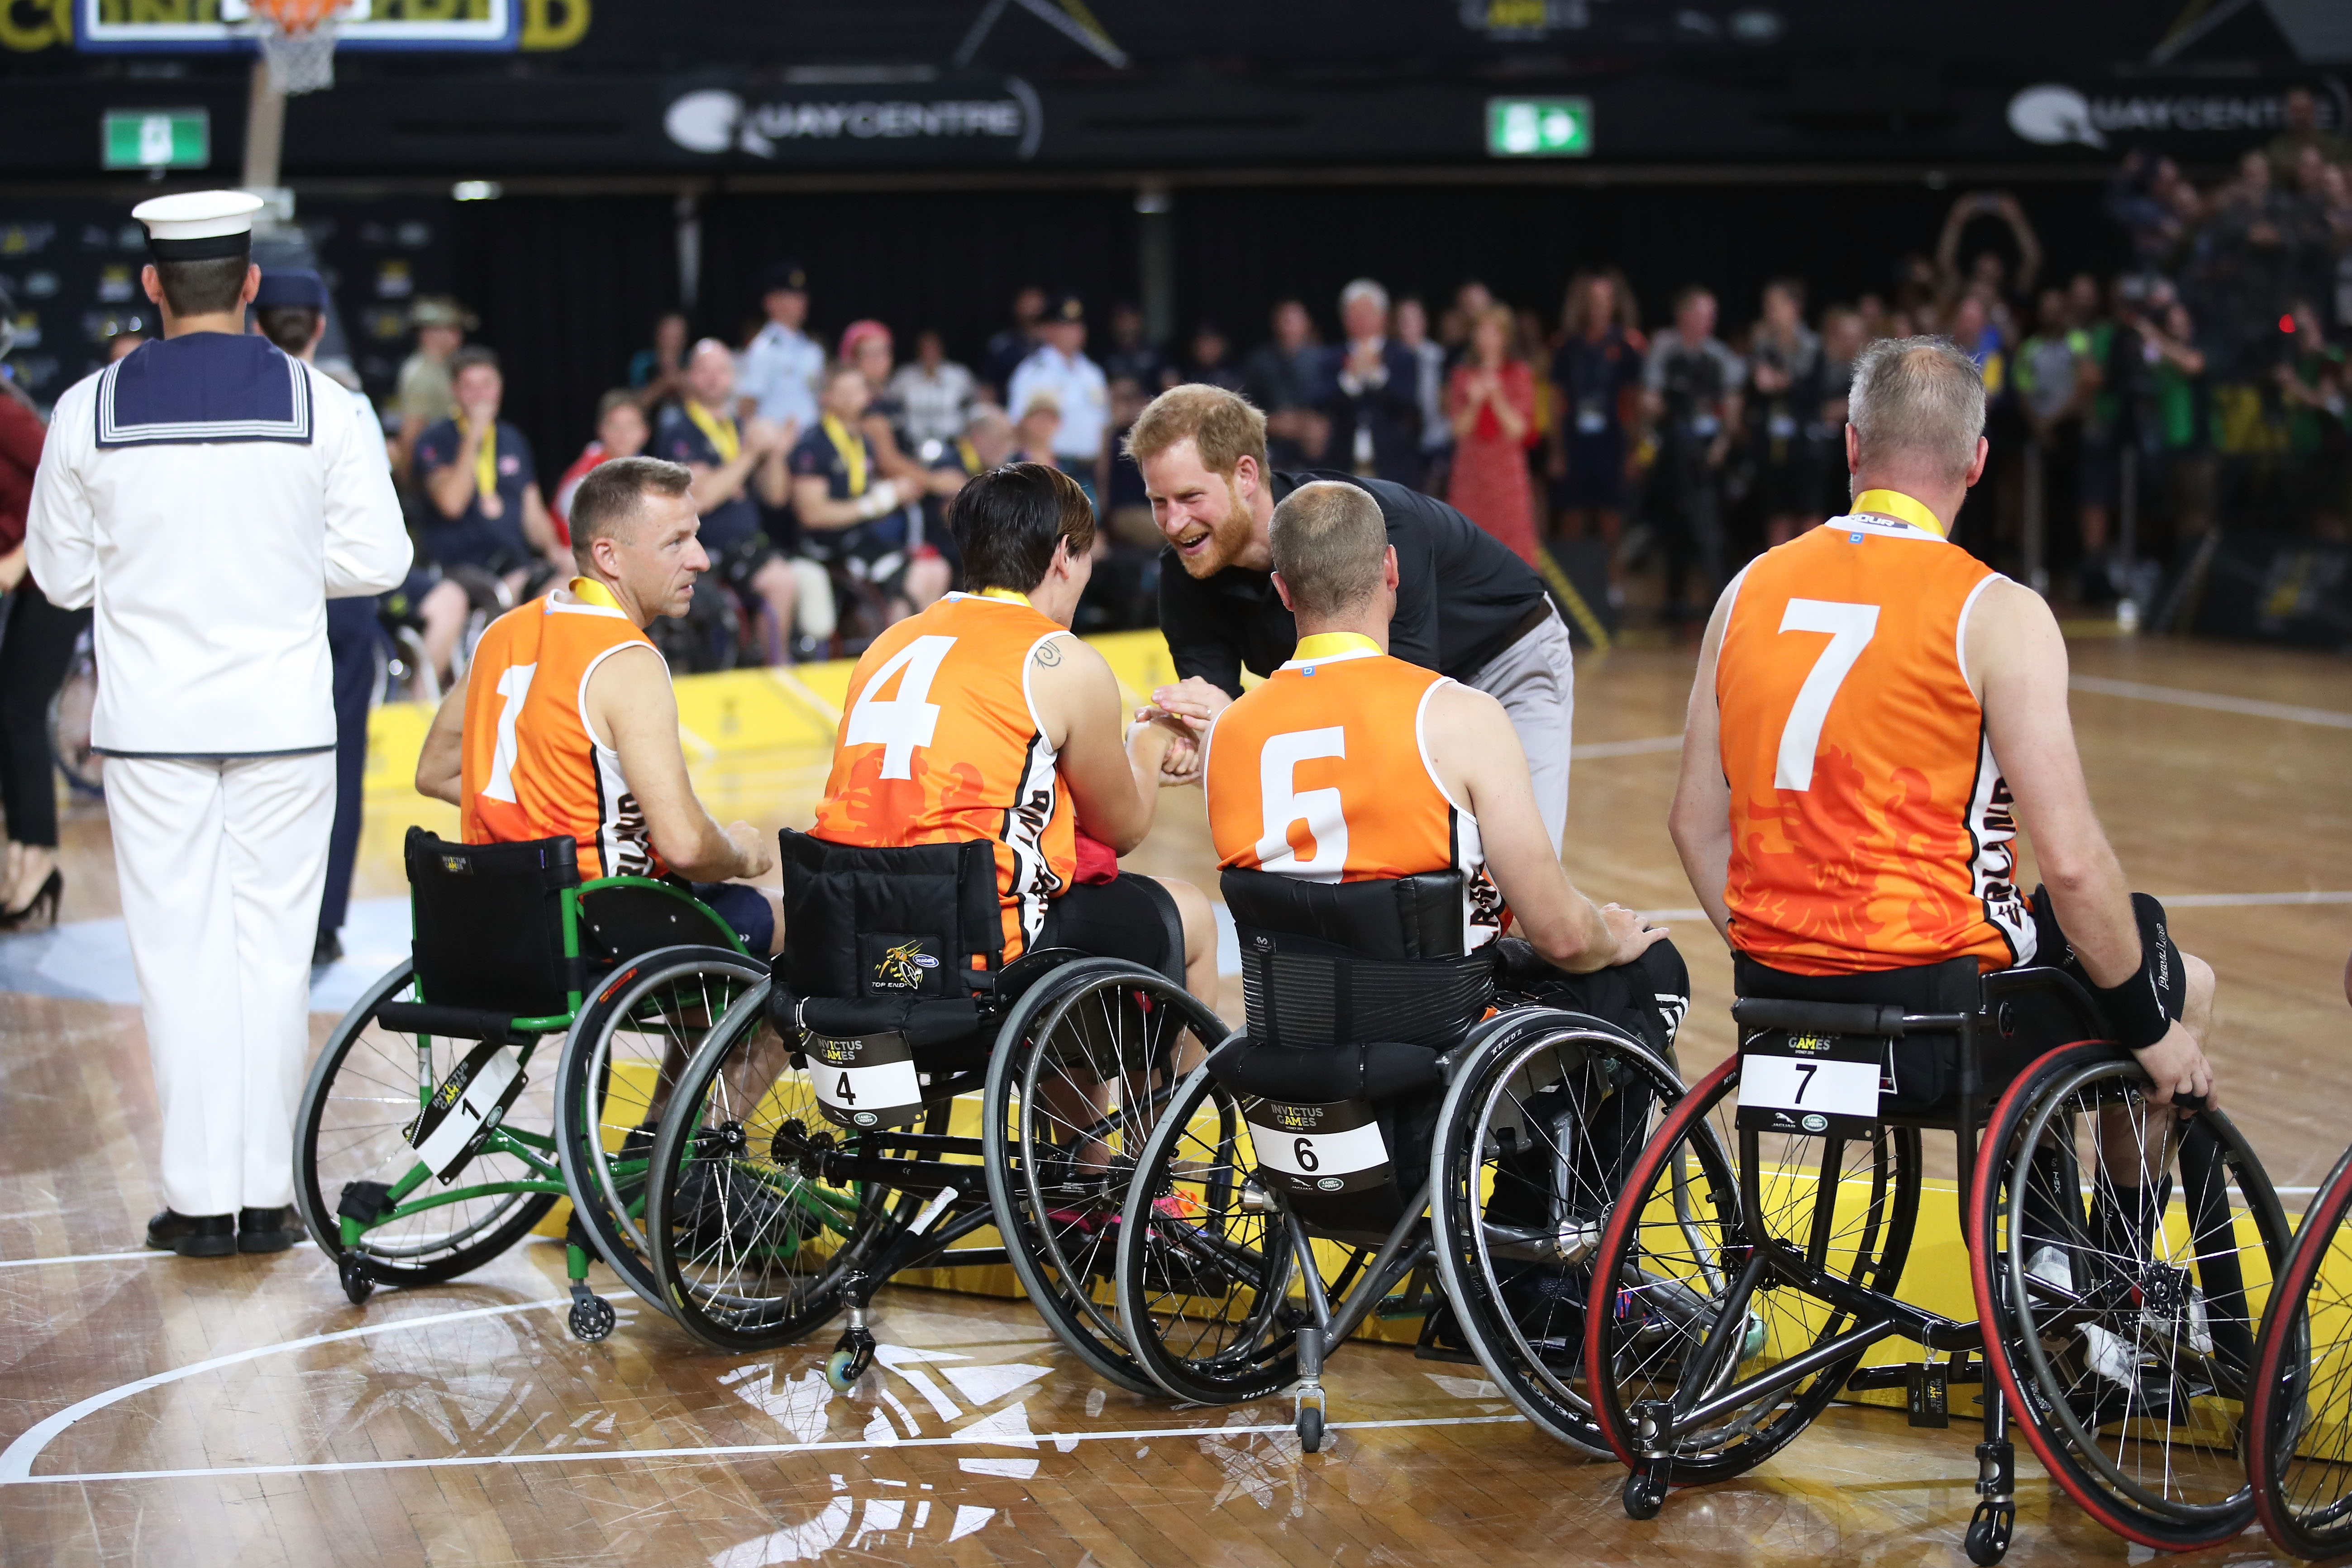 The The Duke of Sussex congratulates the silver medallists after the Wheelchair Basketball gold medal match during the Invictus Games in Sydney in 2018